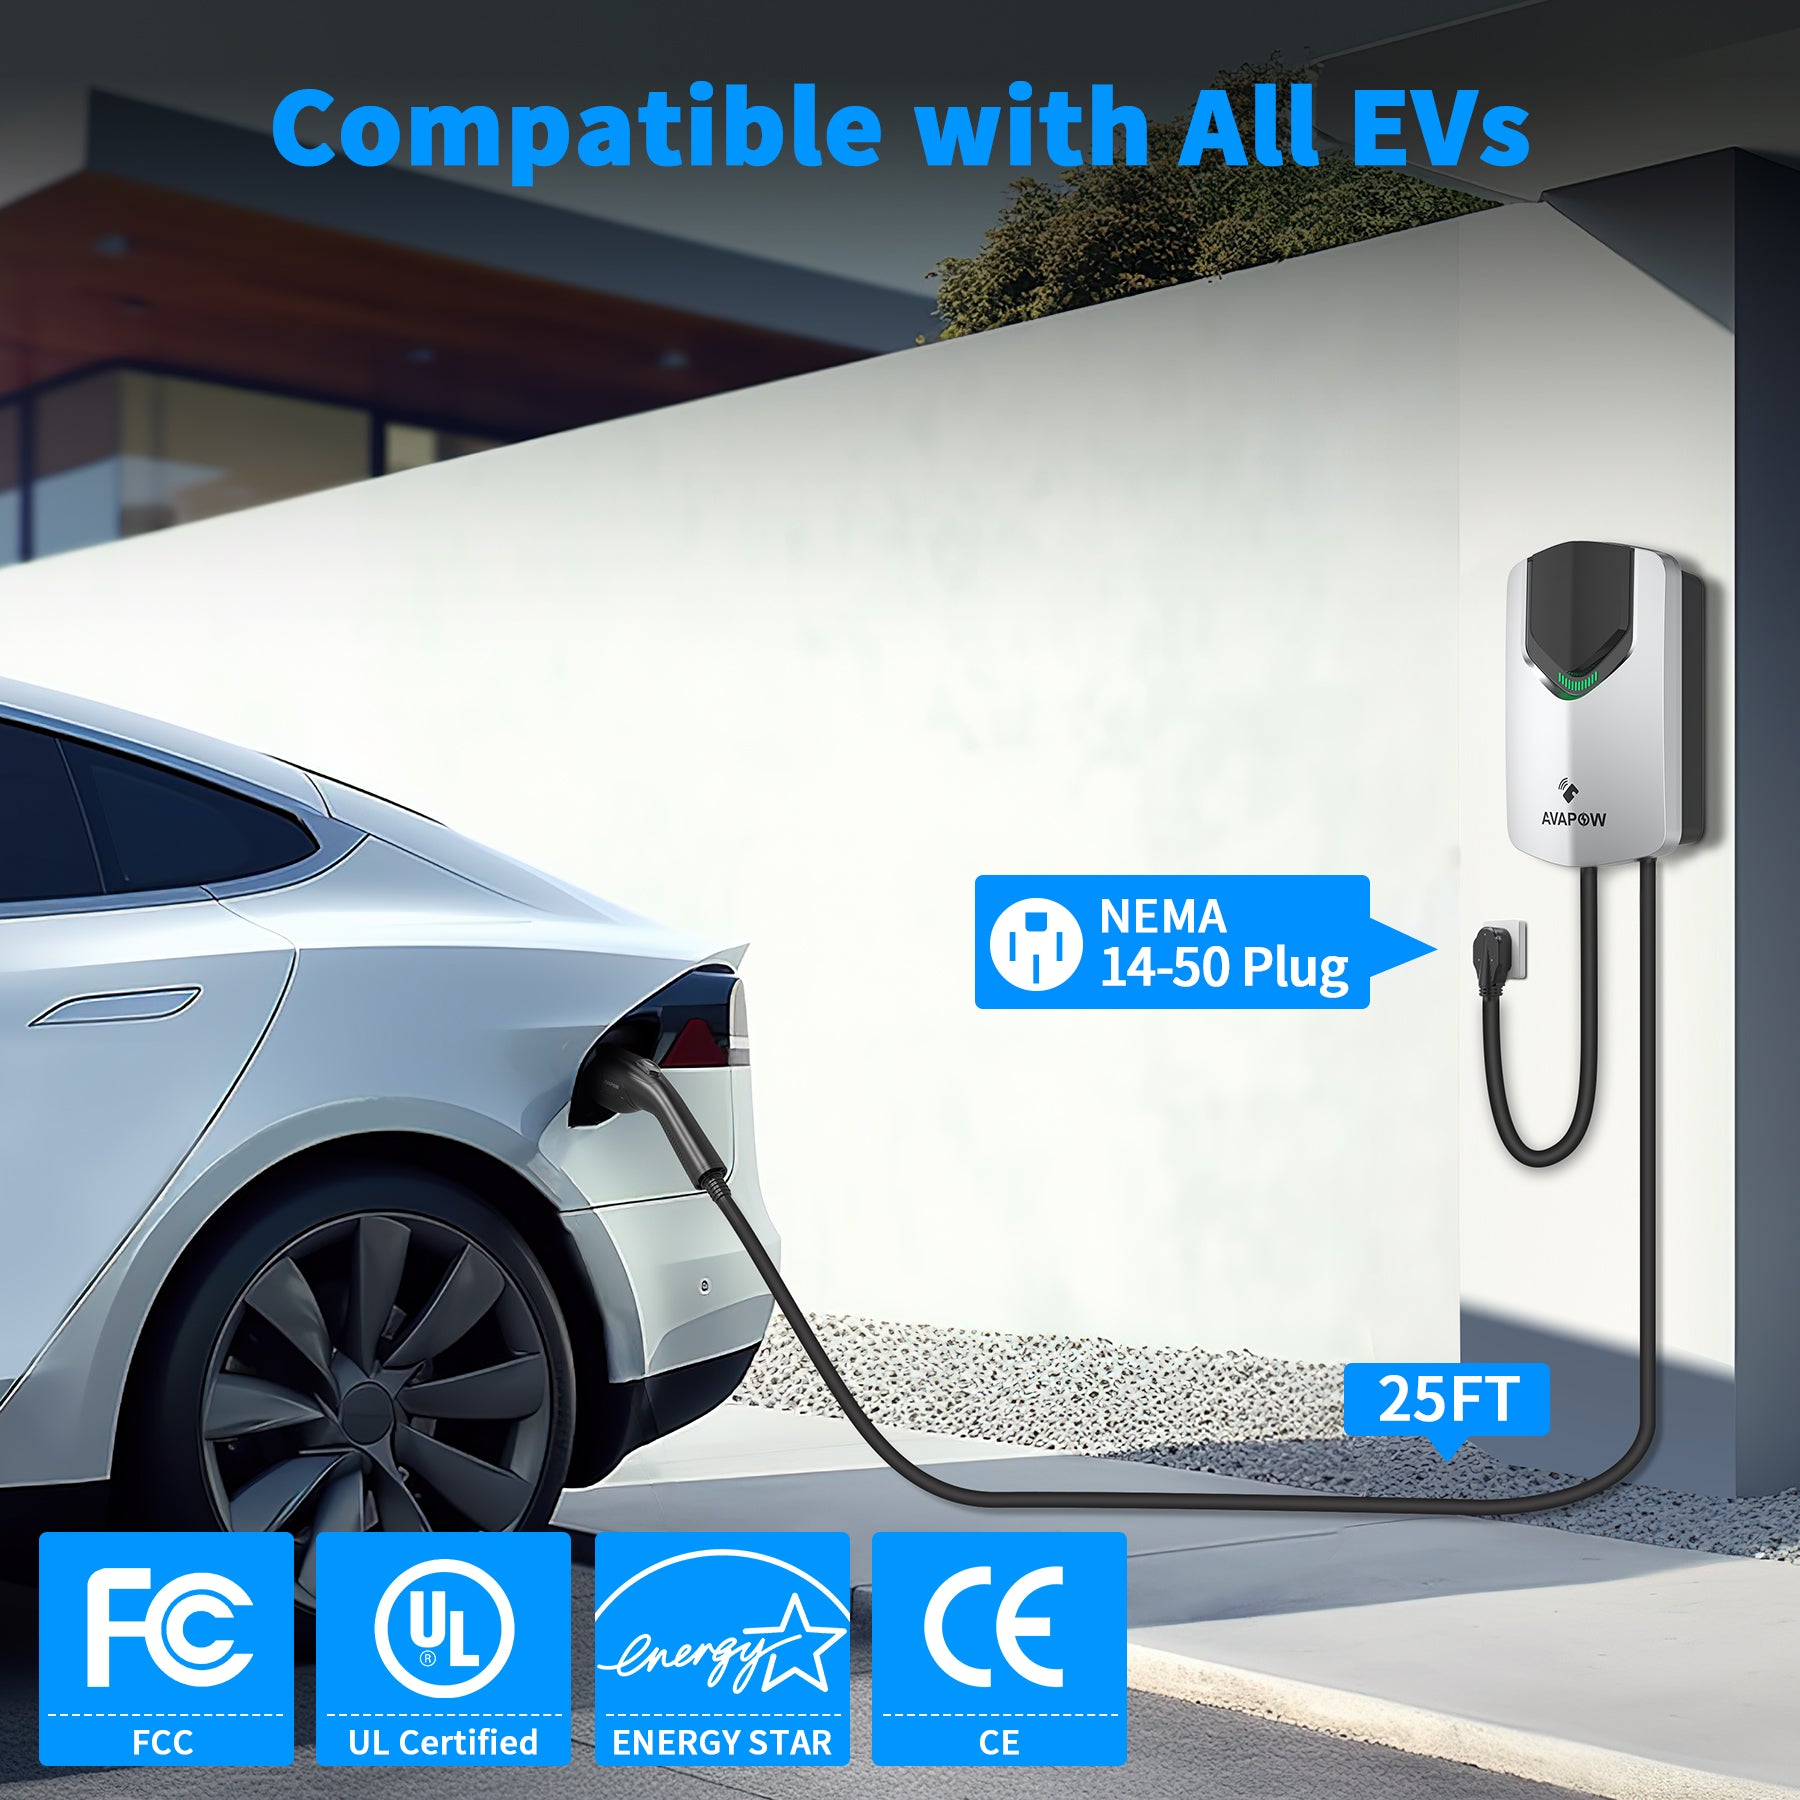 AVAPOW EV Charger (for J1772 EVs) 48A 240V Electric Car Home Charging Stations with Holder, WiFi/Card Swipe Enabled Level 2 EV Charger with 25FT EV Charging Cable and NEMA 14-50 Charger Plug